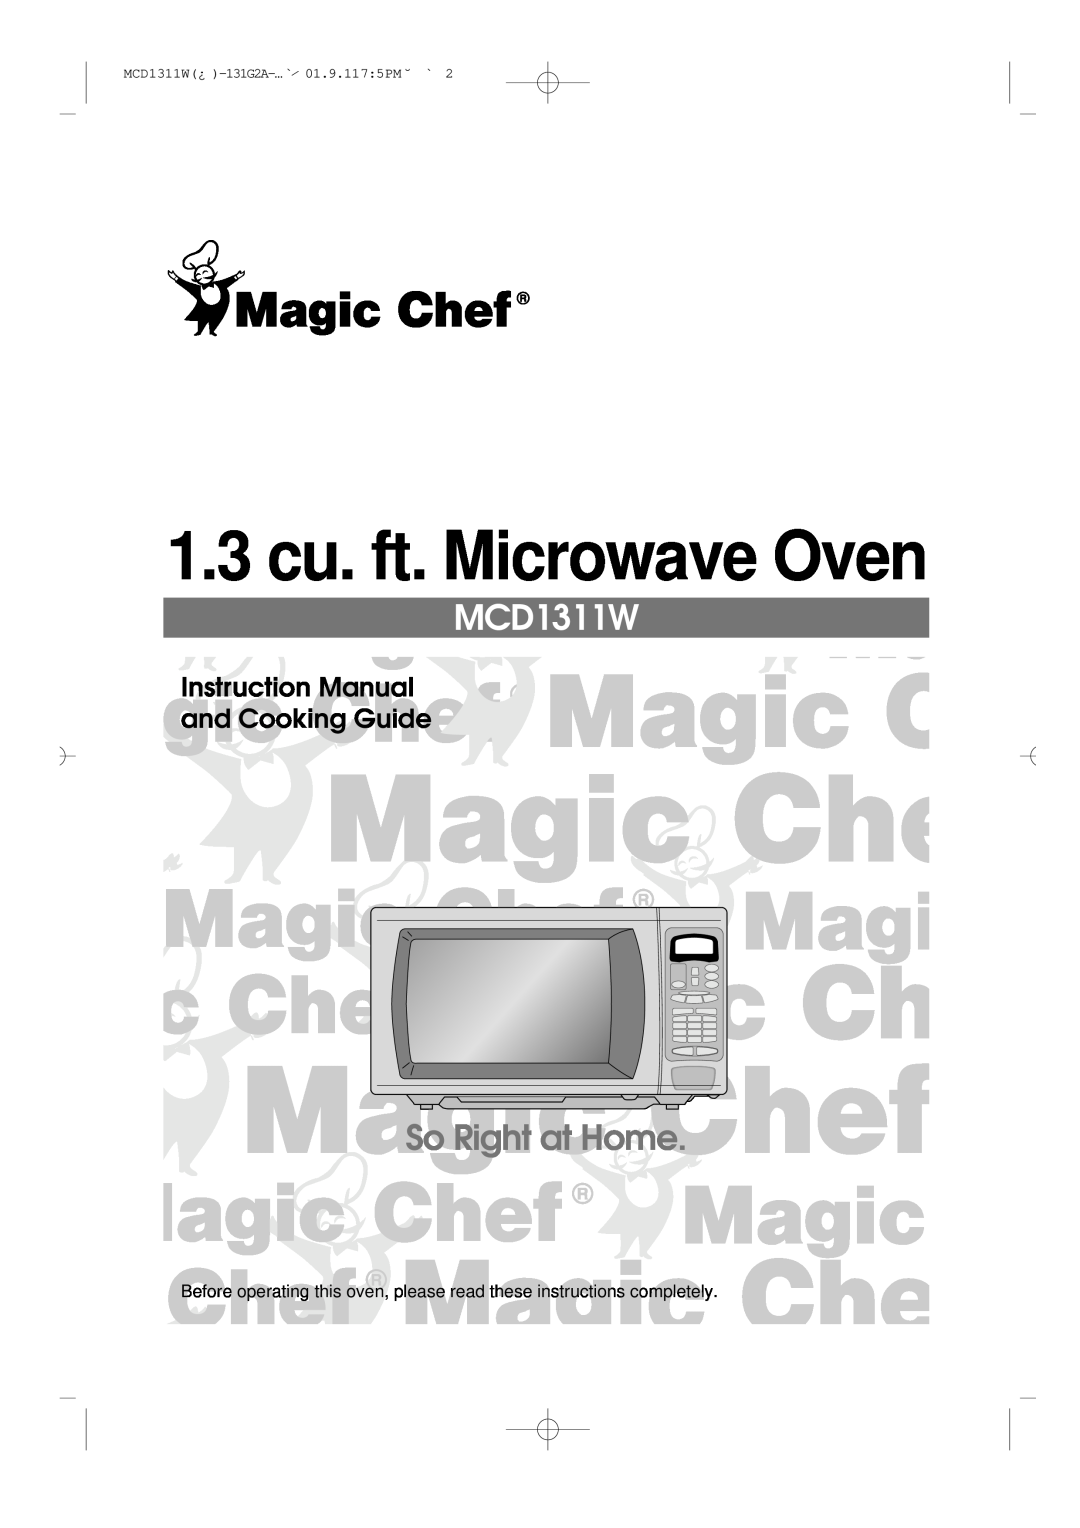 Magic Chef MCD1311W instruction manual 1.3 cu. ft. Microwave Oven, So Right at Home, Instruction Manual and Cooking Guide 